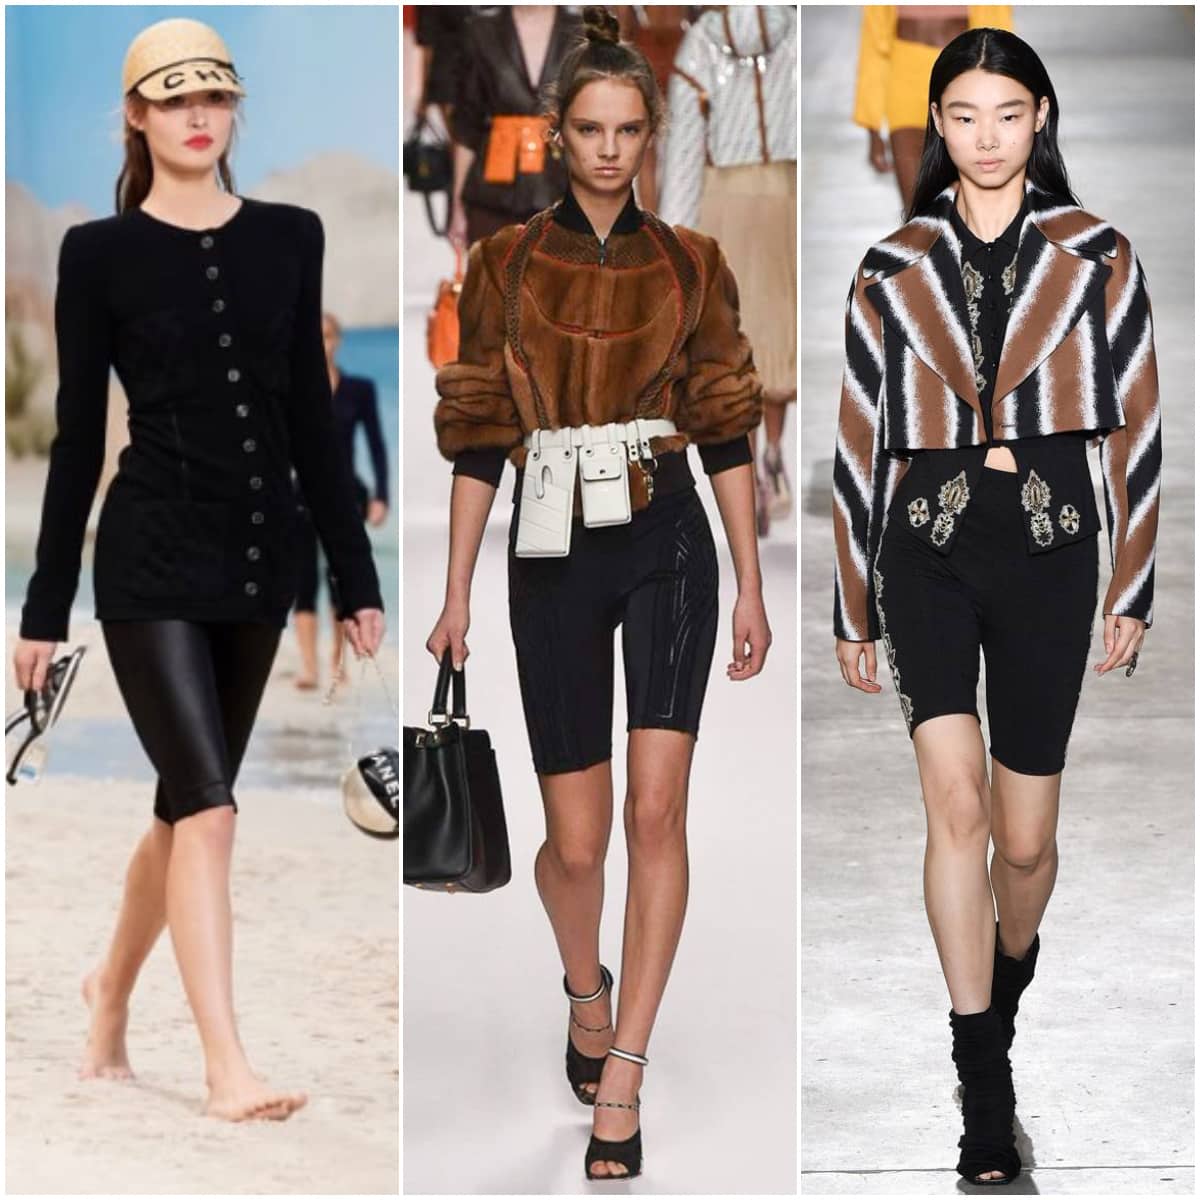 10 womenswear trends dominating the Spring/Summer 2019 runways